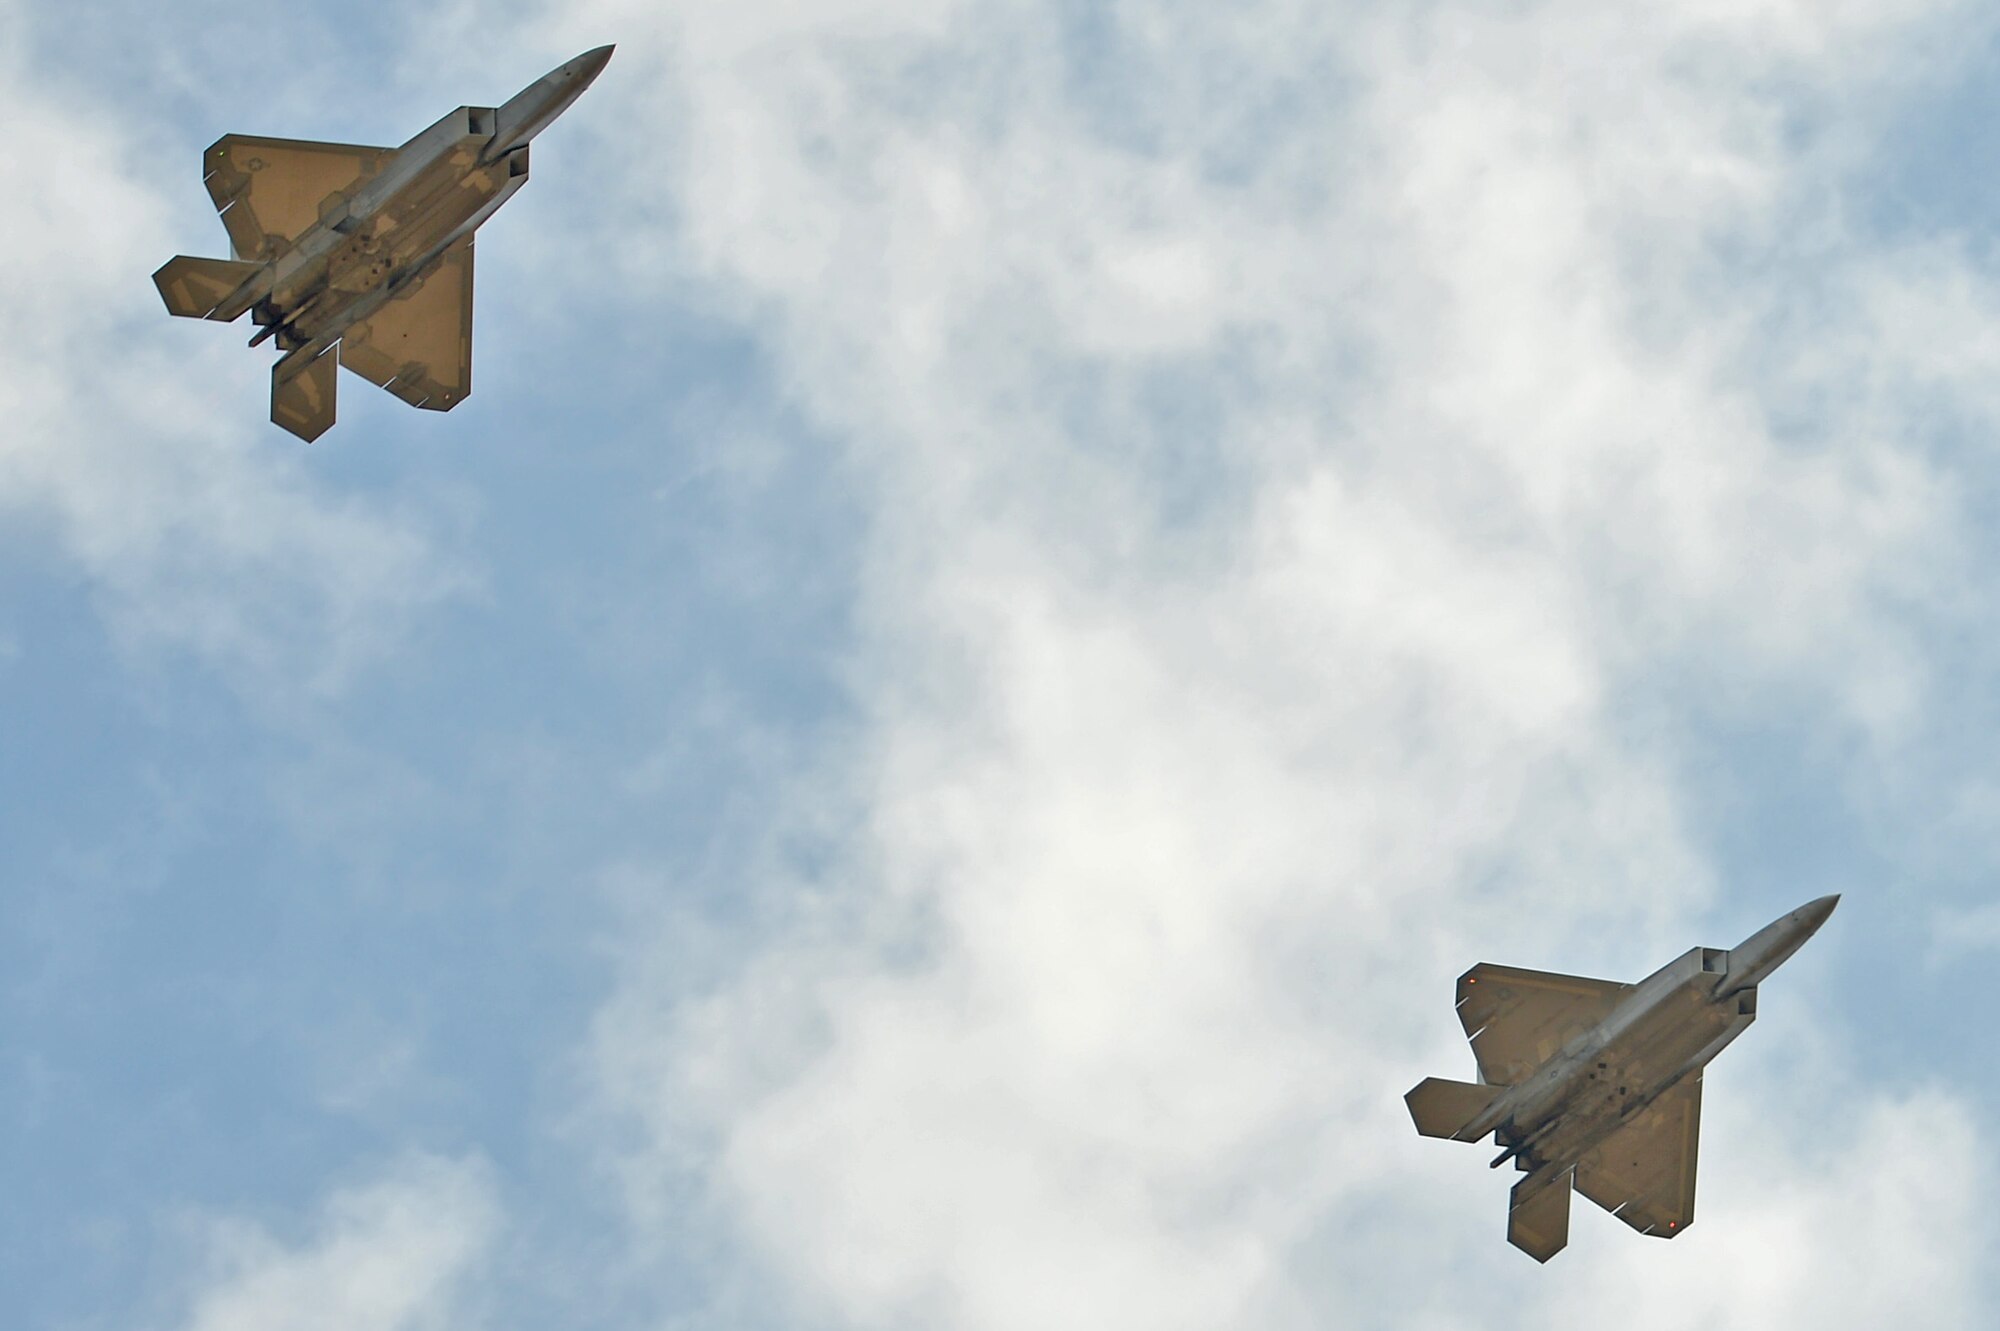 Two F-22 Raptors assigned to the 53rd Wing at Eglin Air Force Base, Fla., fly over onlookers below during an East Coast Airpower Demonstration at Poinsett Electronic Combat Range, Wedgefield, S.C., Oct. 27, 2016. The Raptor is capable of performing both air-to-air and air-to-ground operations, executing the Air Force mission worldwide. (U.S. Air Force photo by Airman 1st Class Christopher Maldonado) 